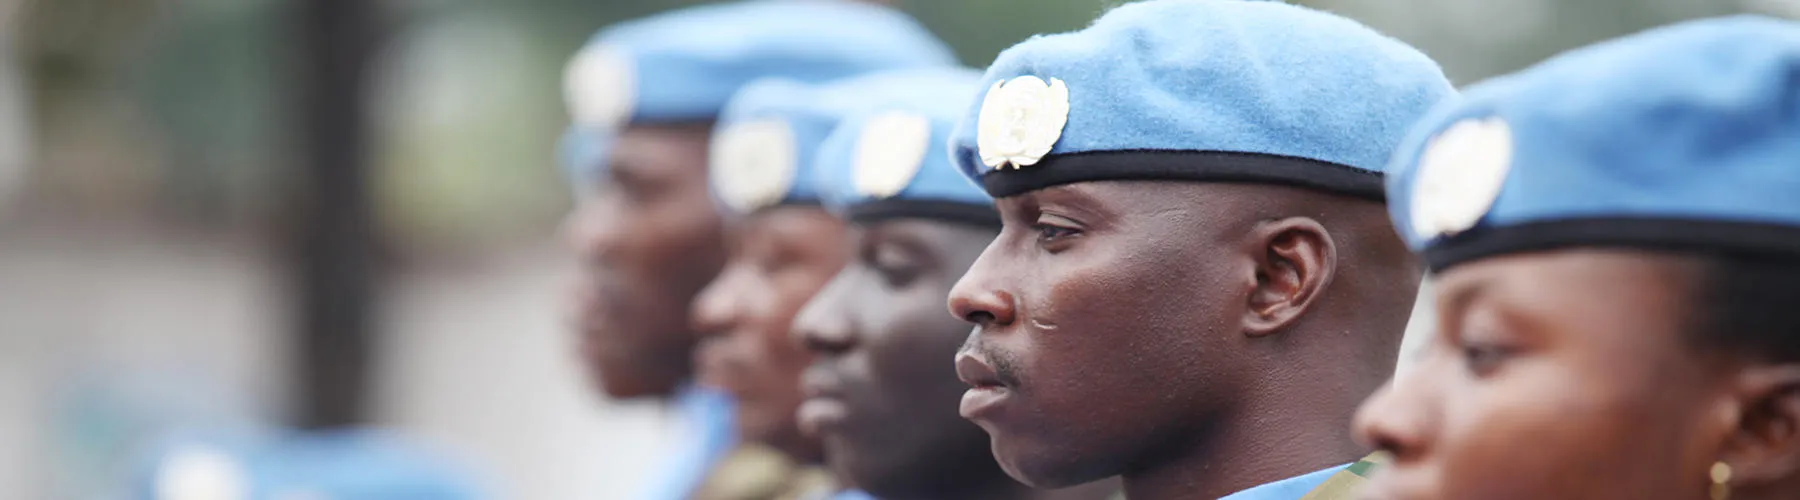 UN Peacekeepers celebrating Peacekeepers Day in DRC